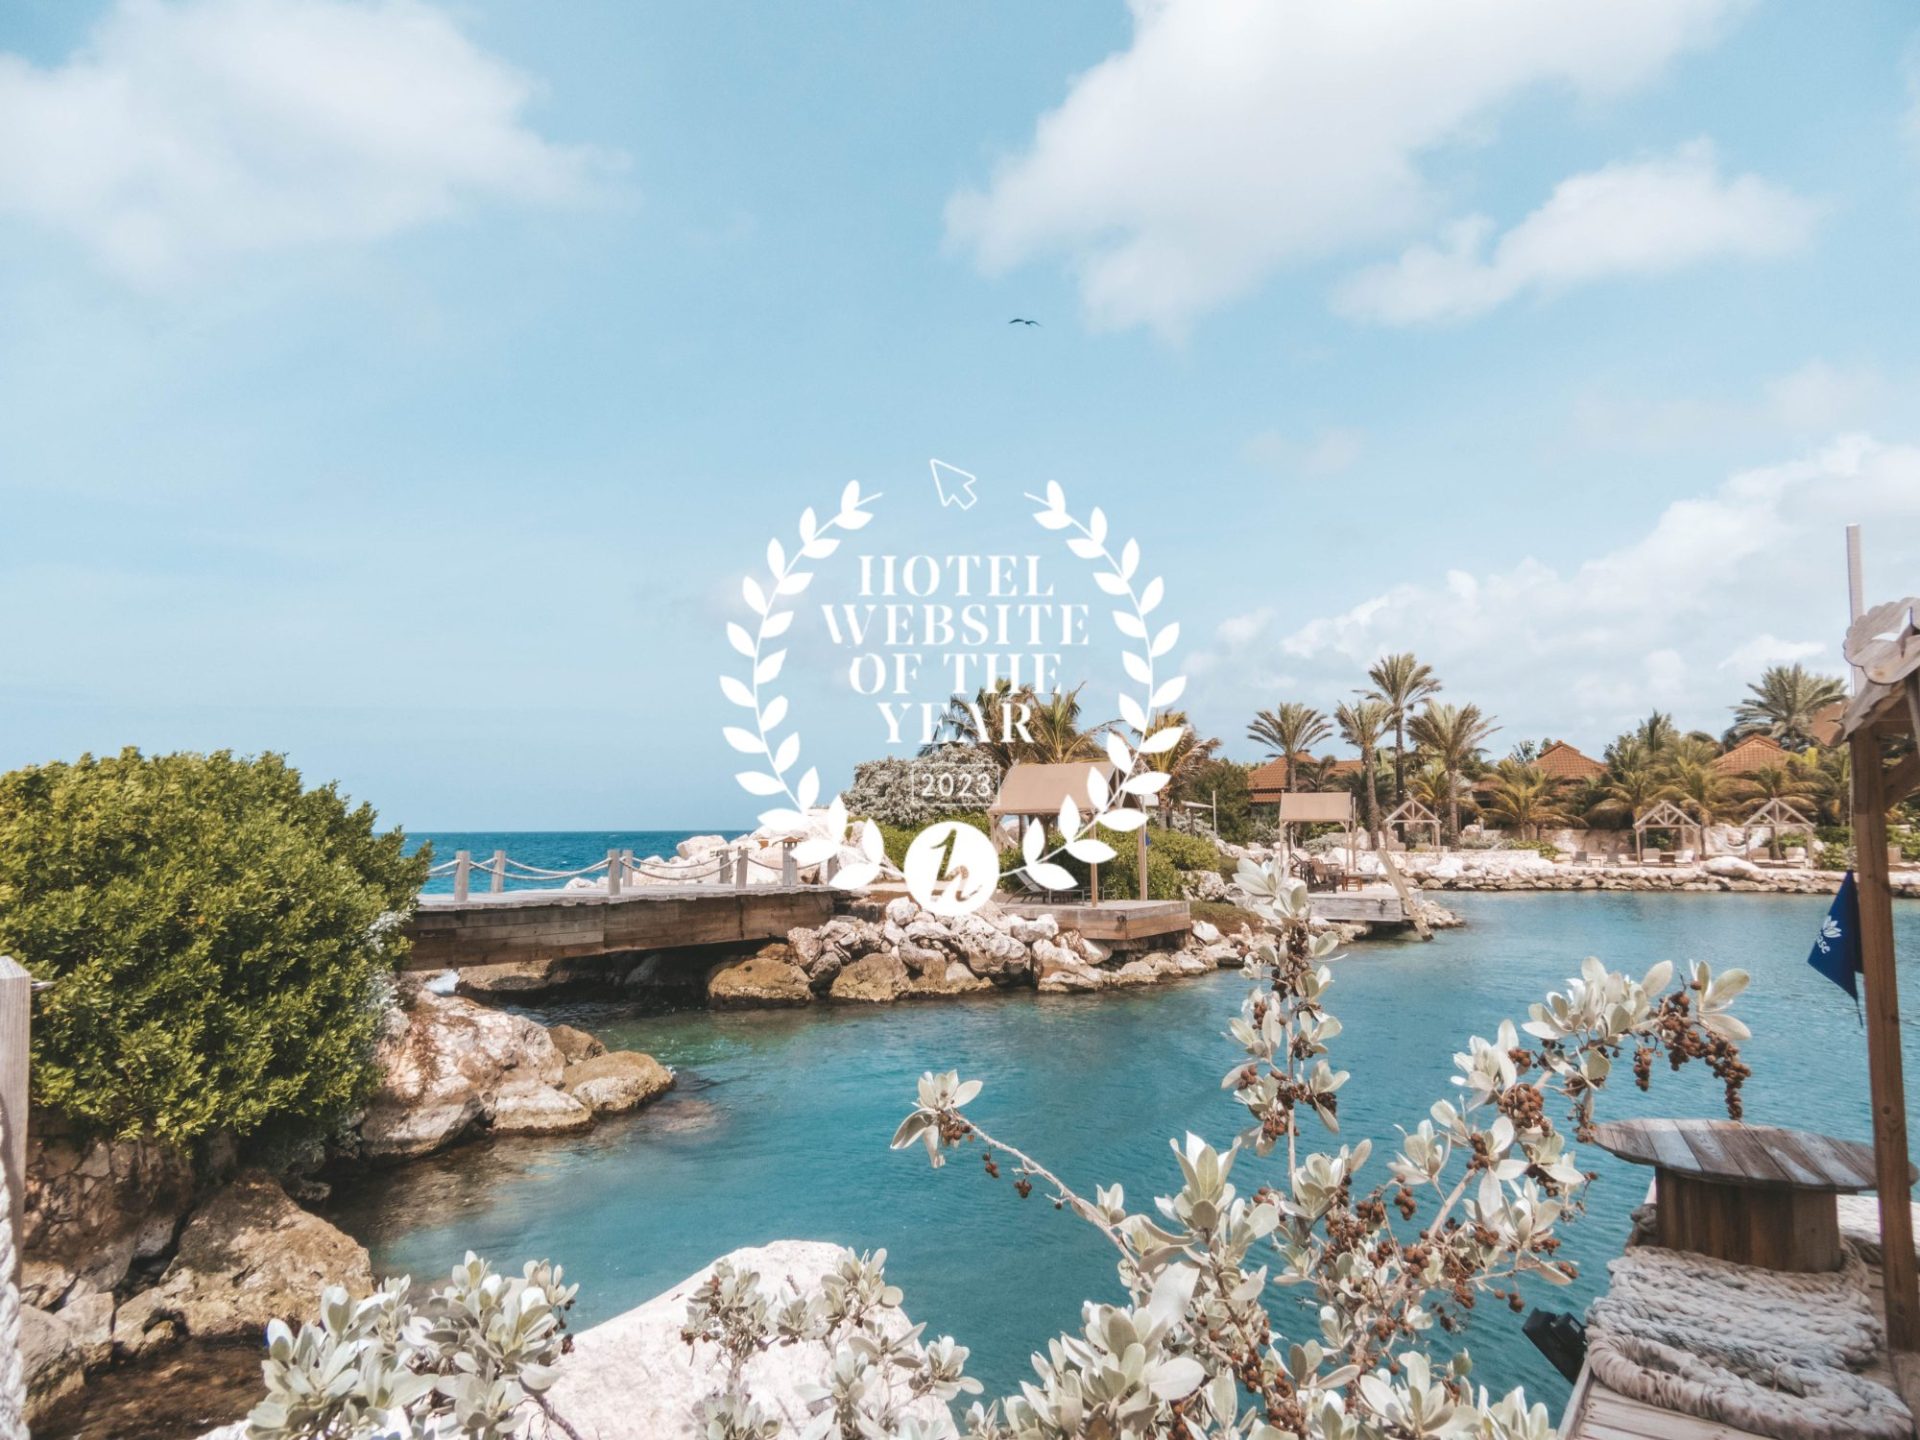 HOTEL WEBSITE OF THE YEAR AWARDS 2023